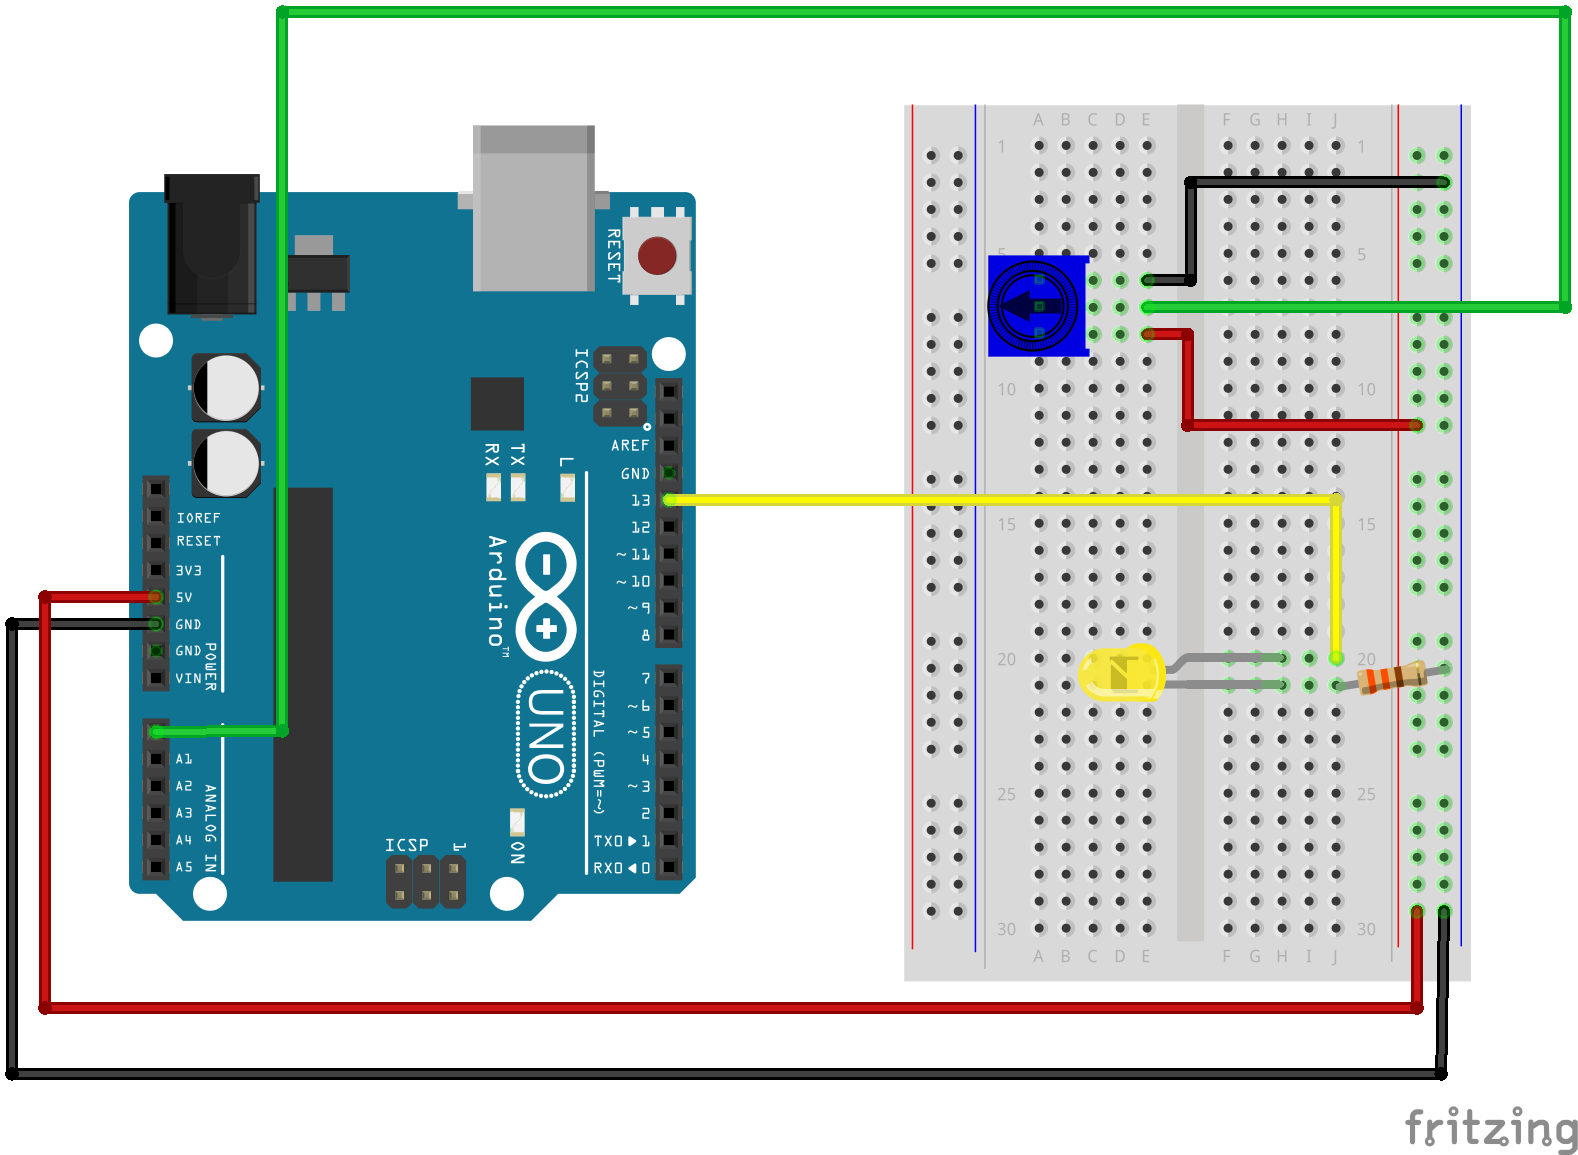 Sik Experiment Guide For Arduino - V3.2 - Learn.sparkfun - Arduino Wiring Diagram